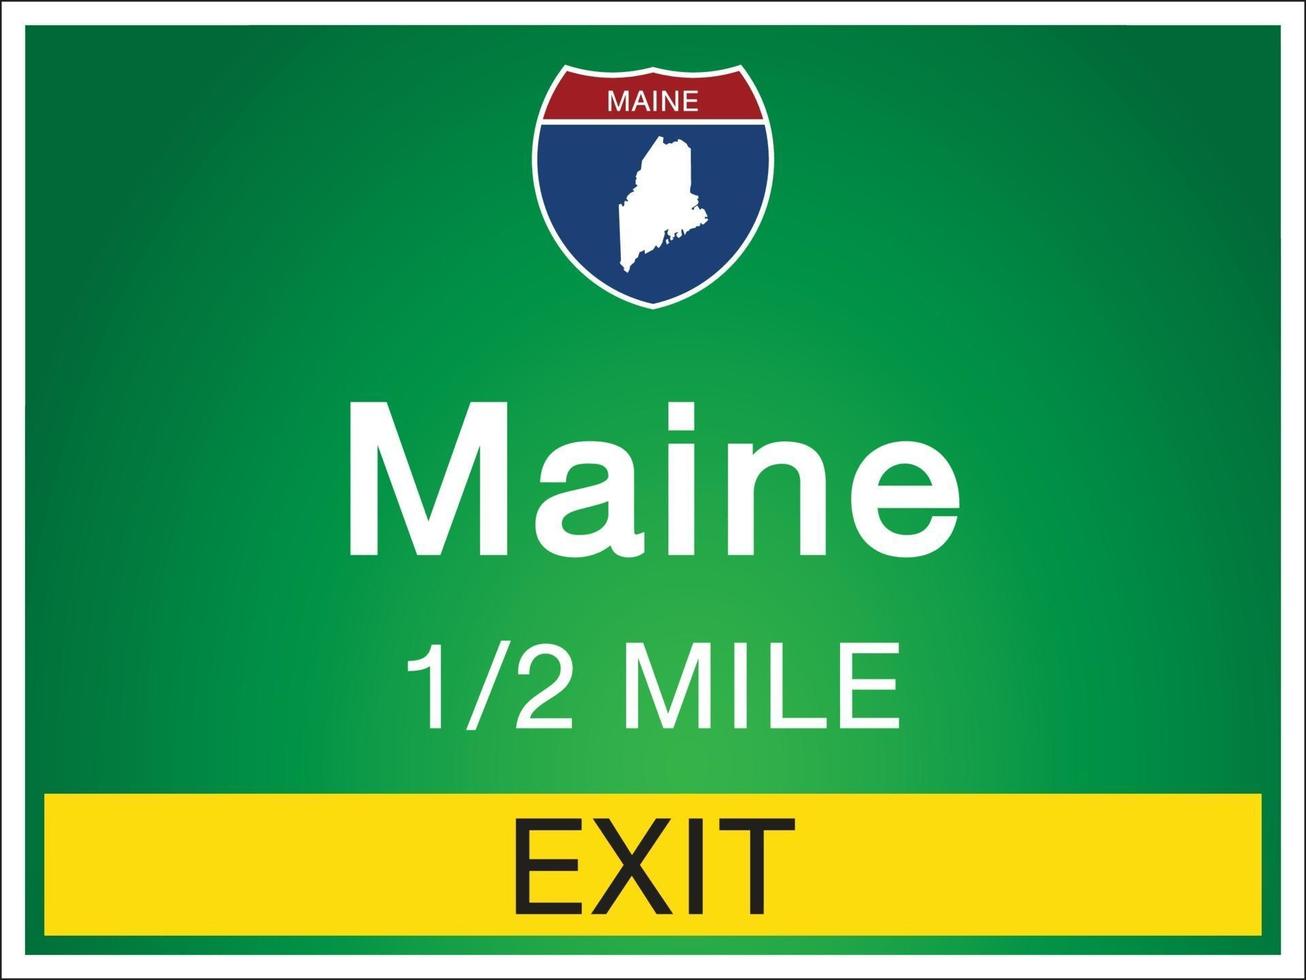 Highway signs before the exit To Maine state information and maps vector